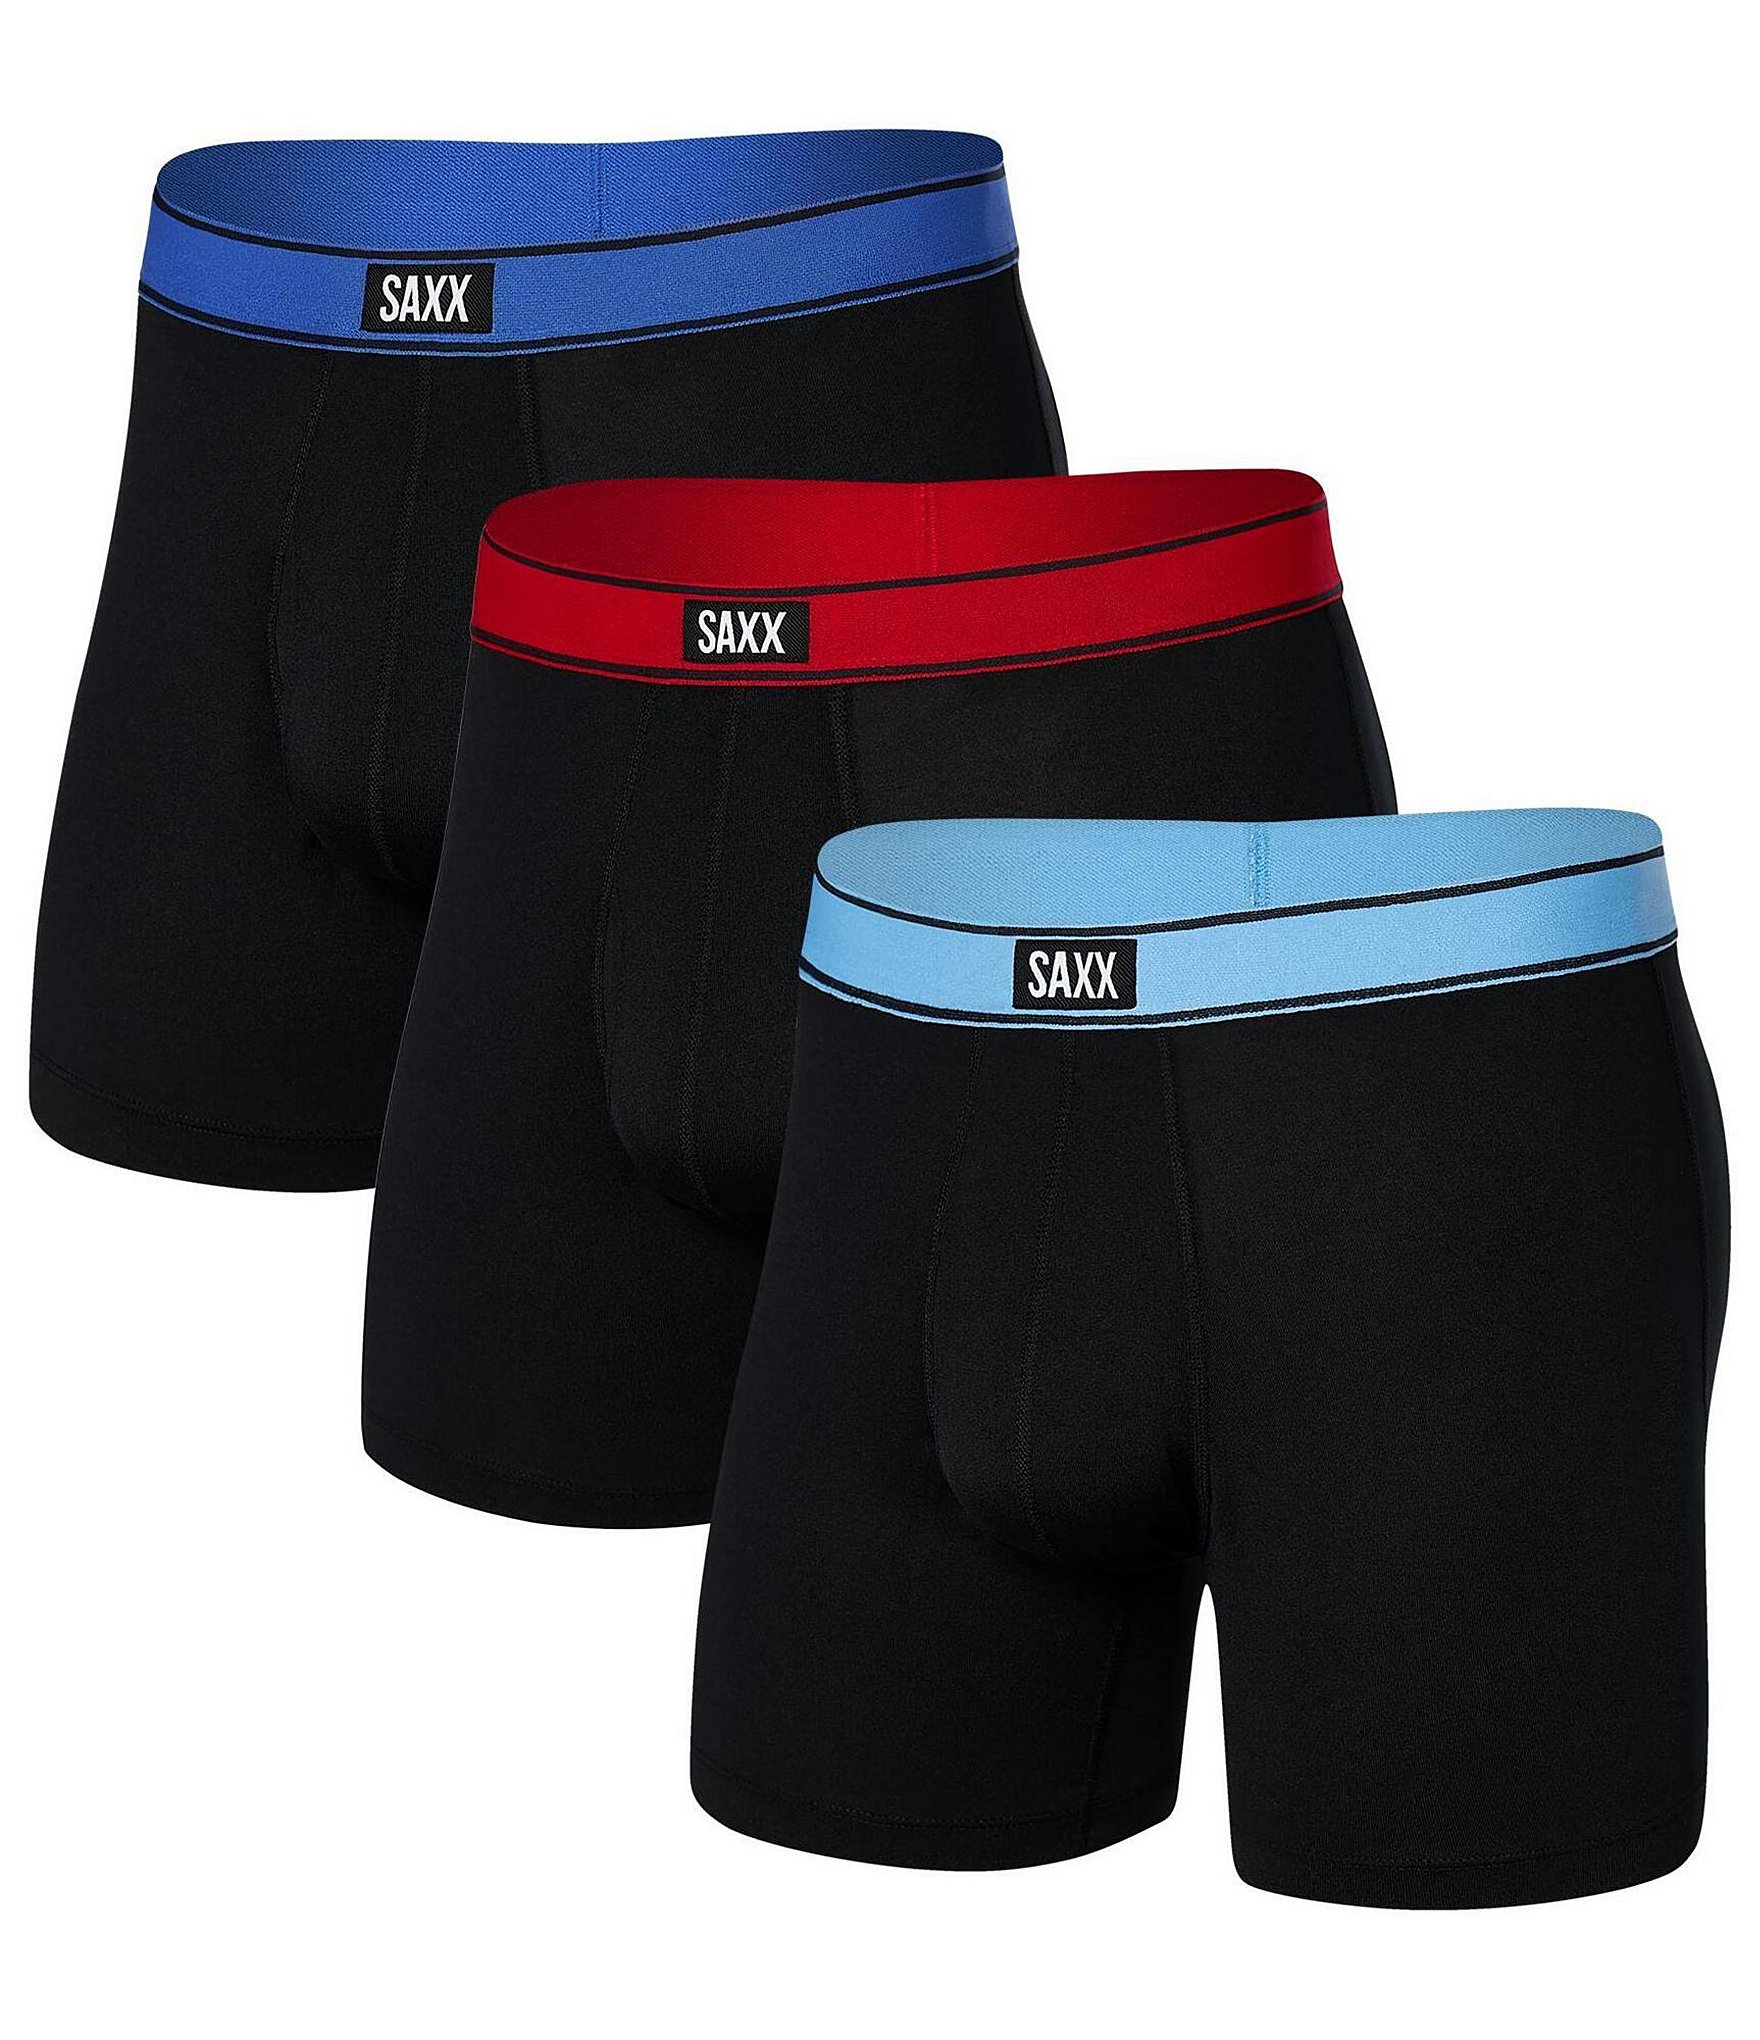 6 x Boxer Briefs SPECIAL Mens Mix Pack Frank and Beans Underwear S M L XL  XXL